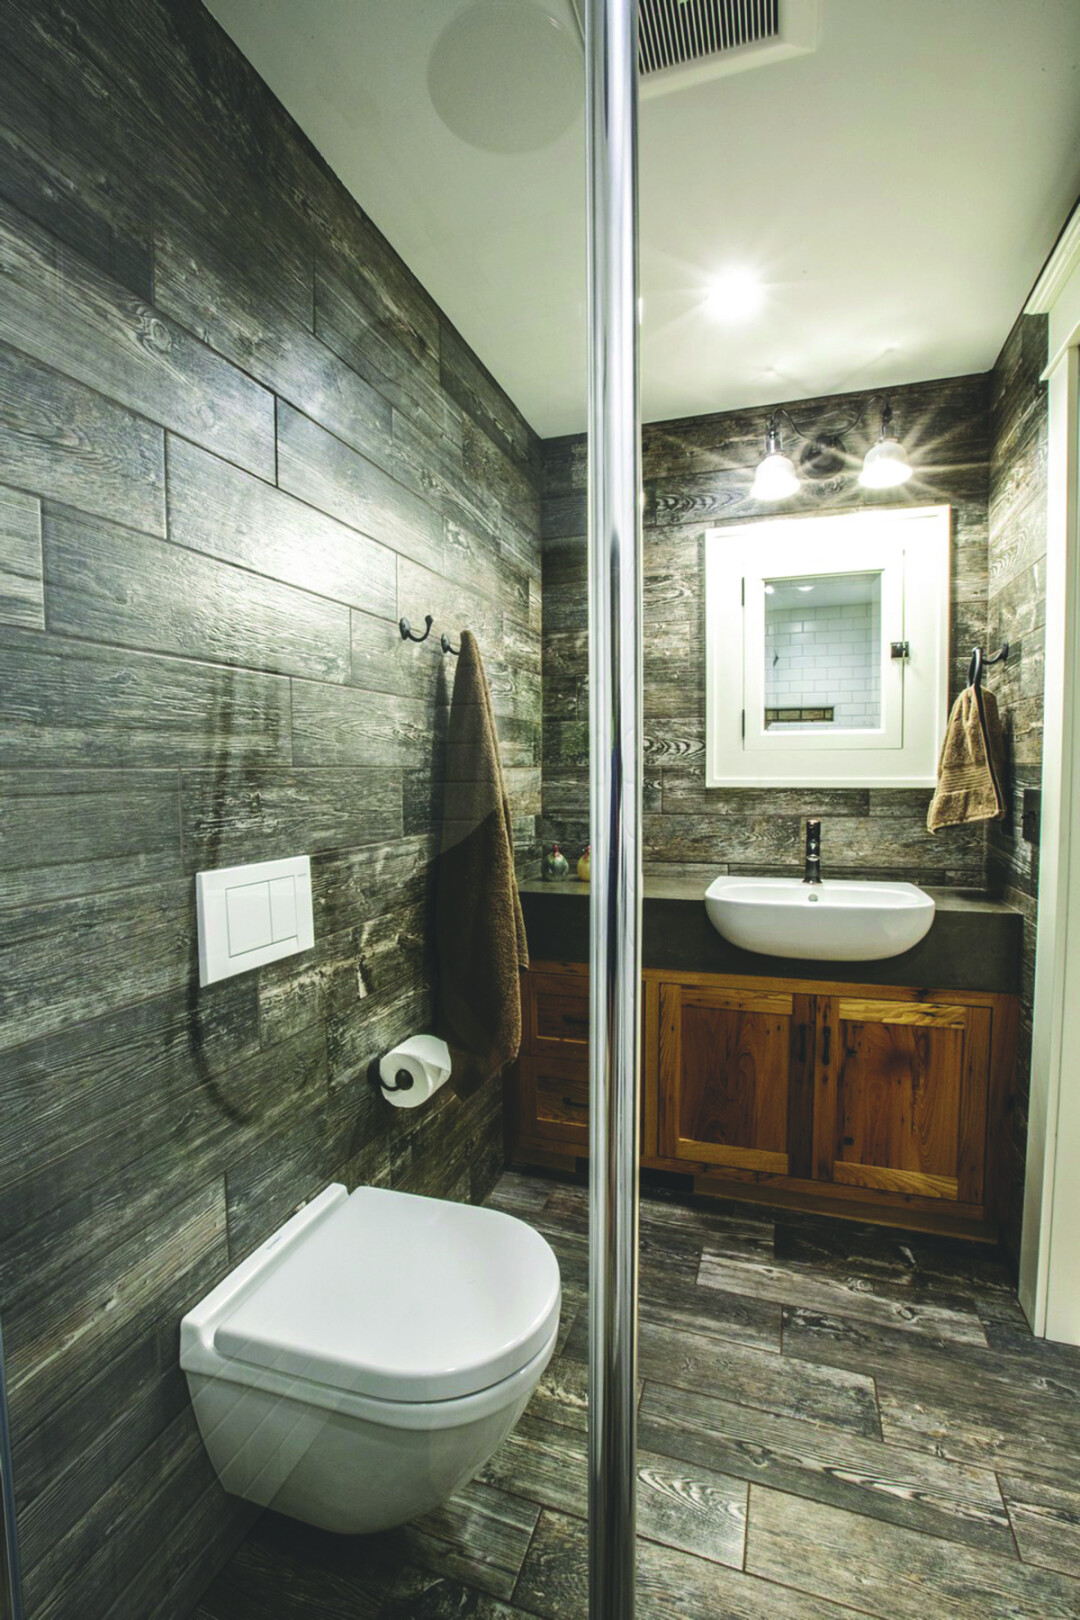 This bathroom project from the same house won 3rd place in the National Kitchen and  Bath Association's Small Bath Category